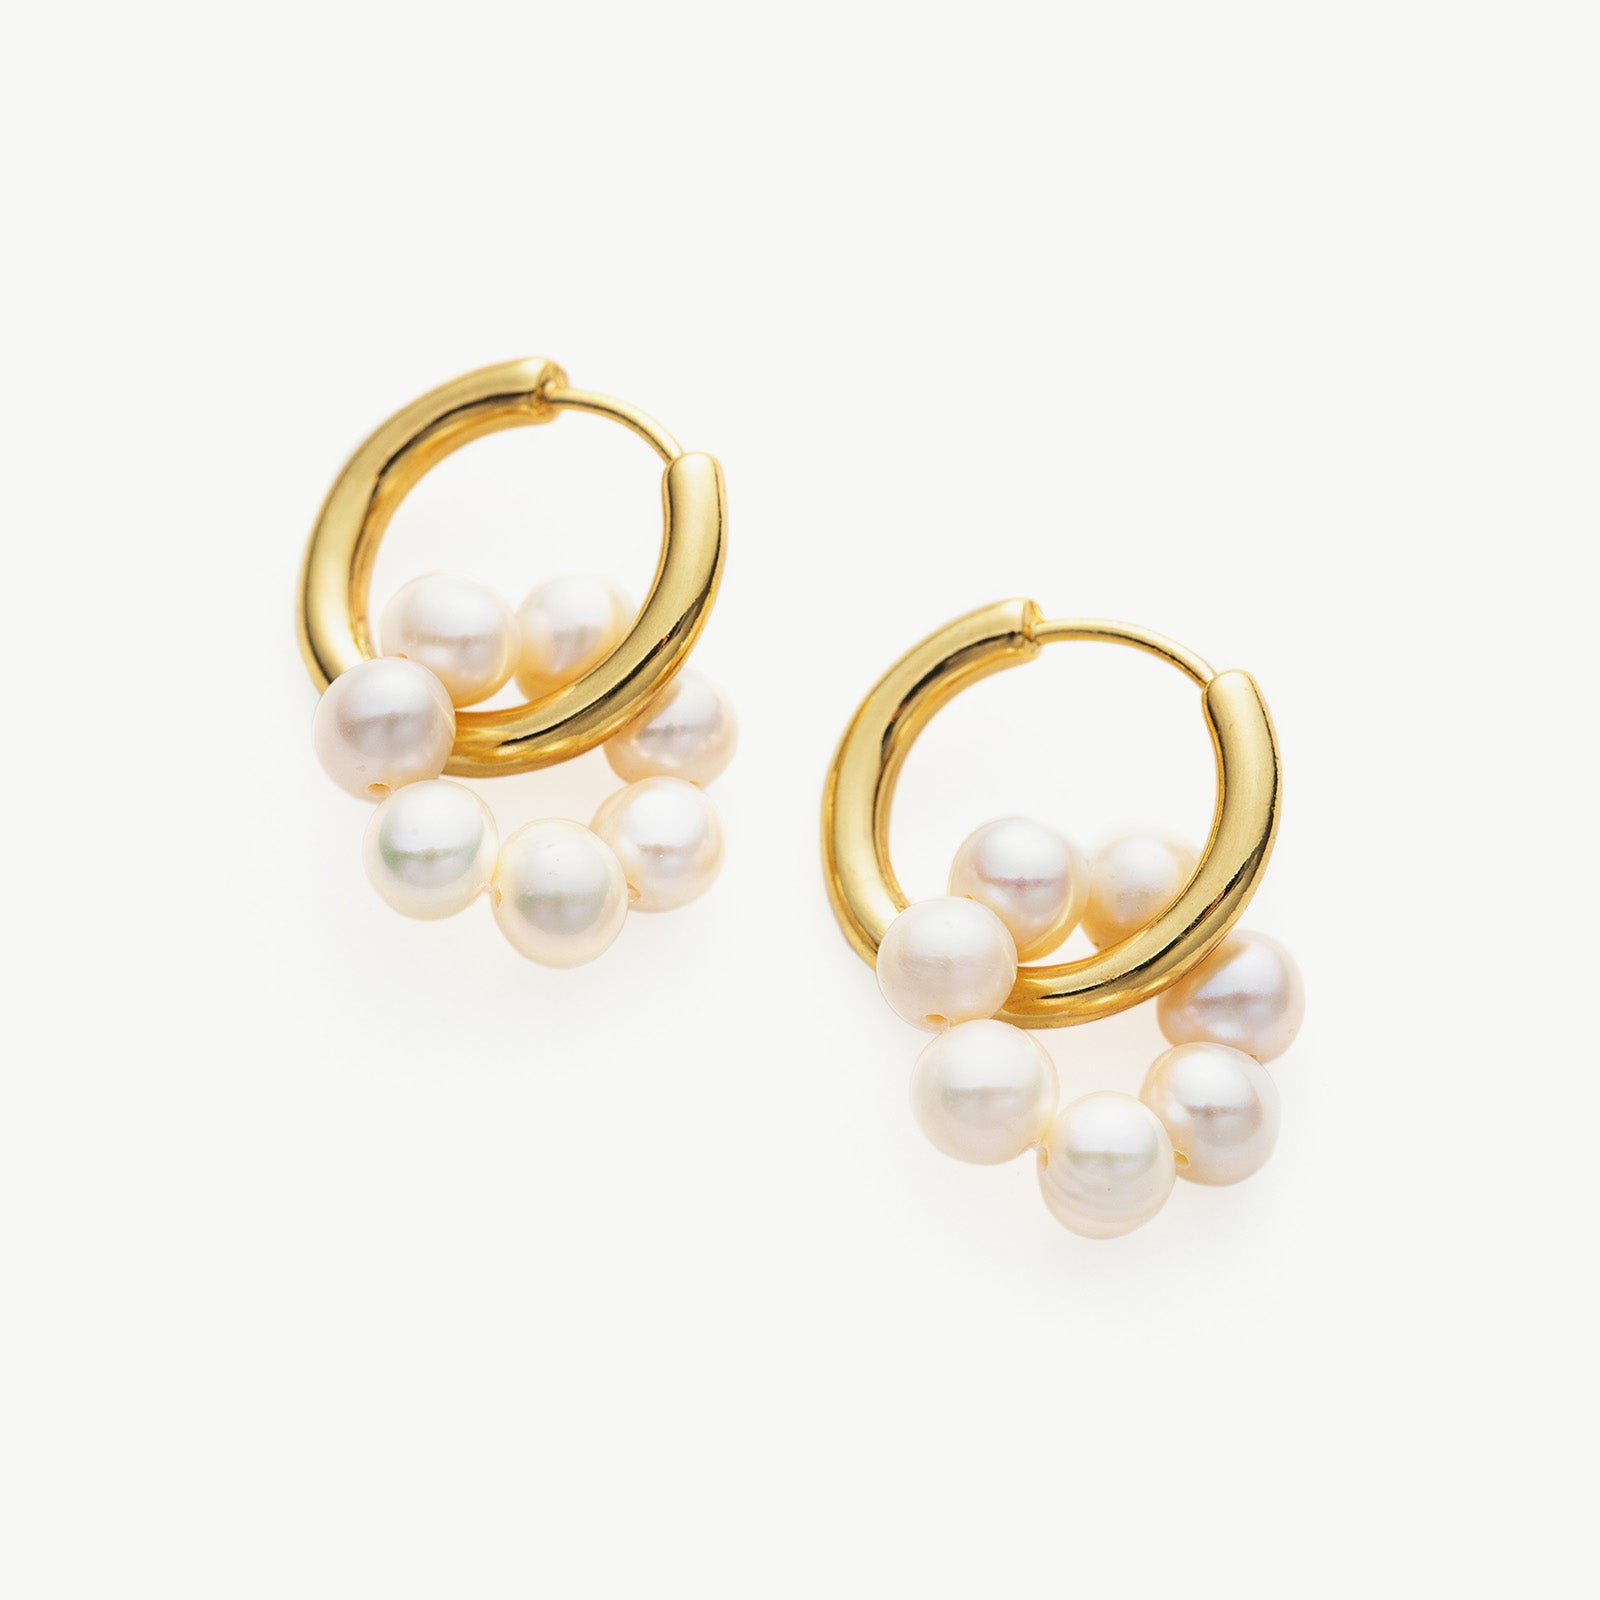 Tunnel Hoop Earrings with Seed Pearls, a chic and pearlescent twist on classic hoops, adding a touch of modern elegance to your style